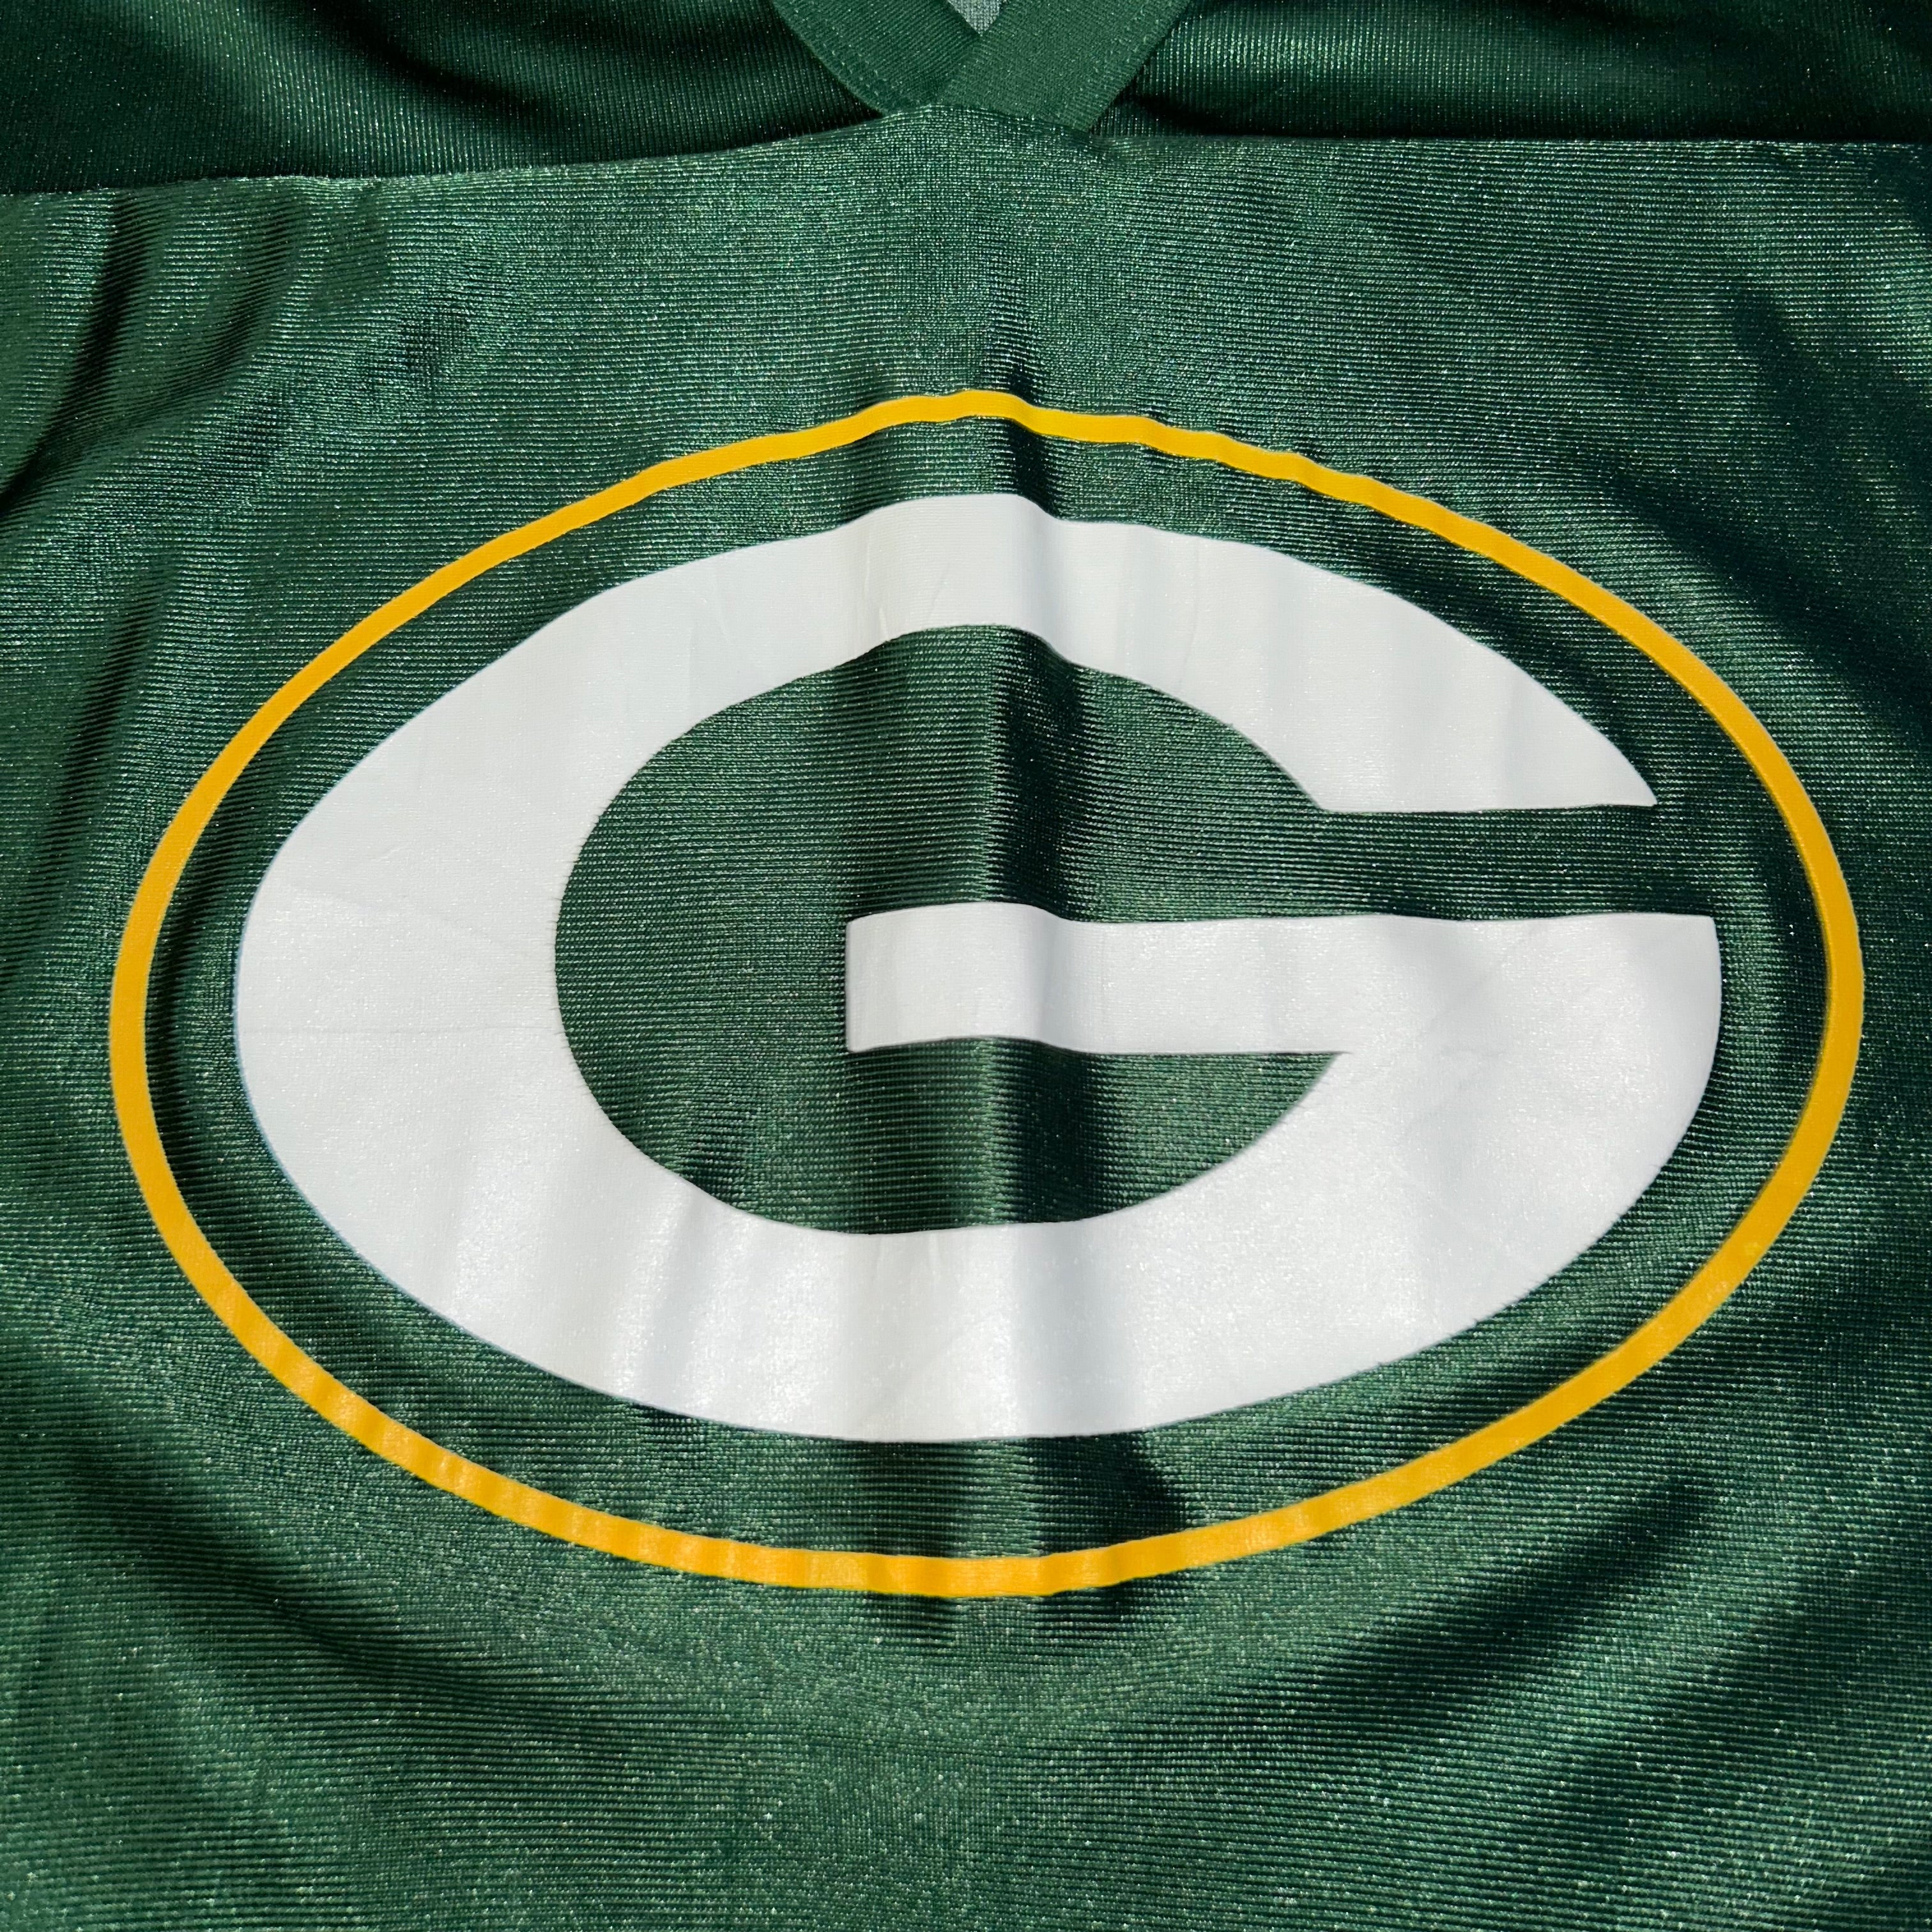 Jersey Green Bay Packers NFL  (M/L)